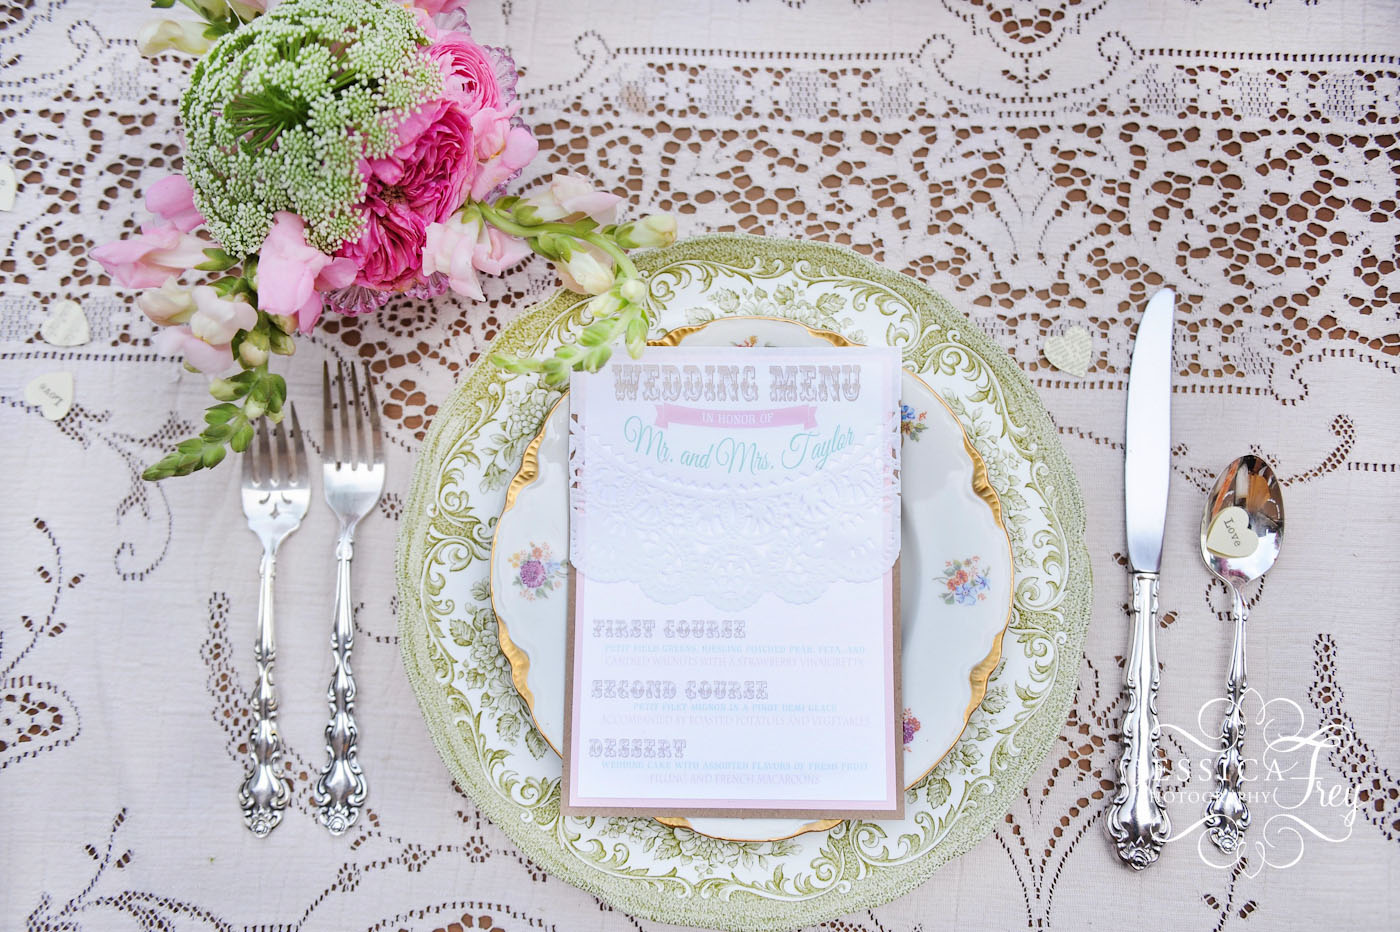 Jessica Frey Photography, mink and pink wedding